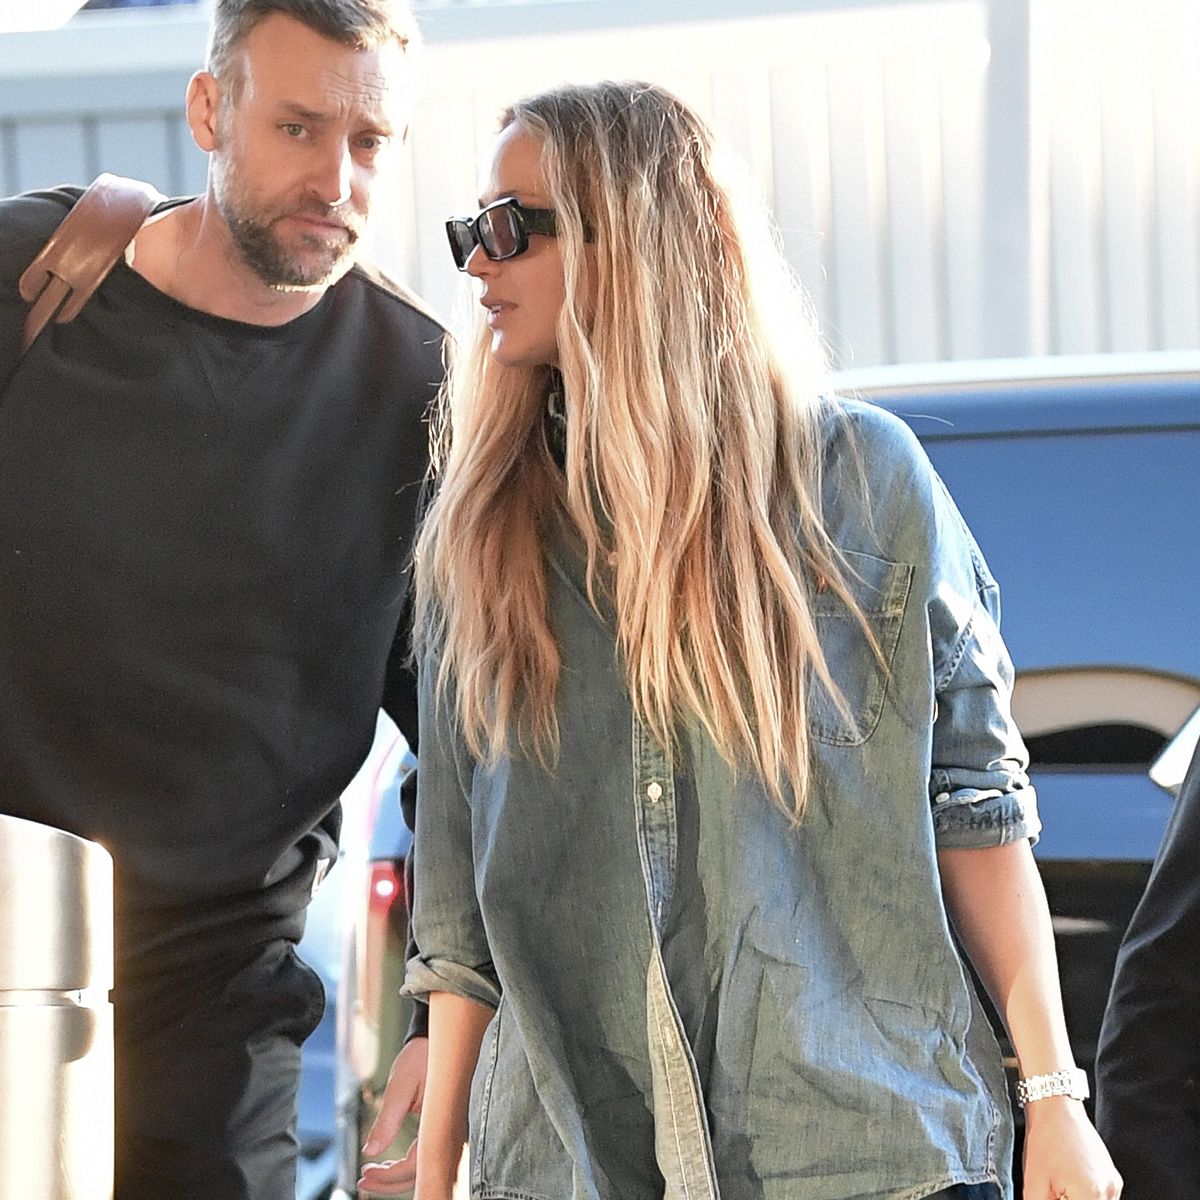 Jennifer Lawrence Wore the Puddle Jeans Trend to the Airport